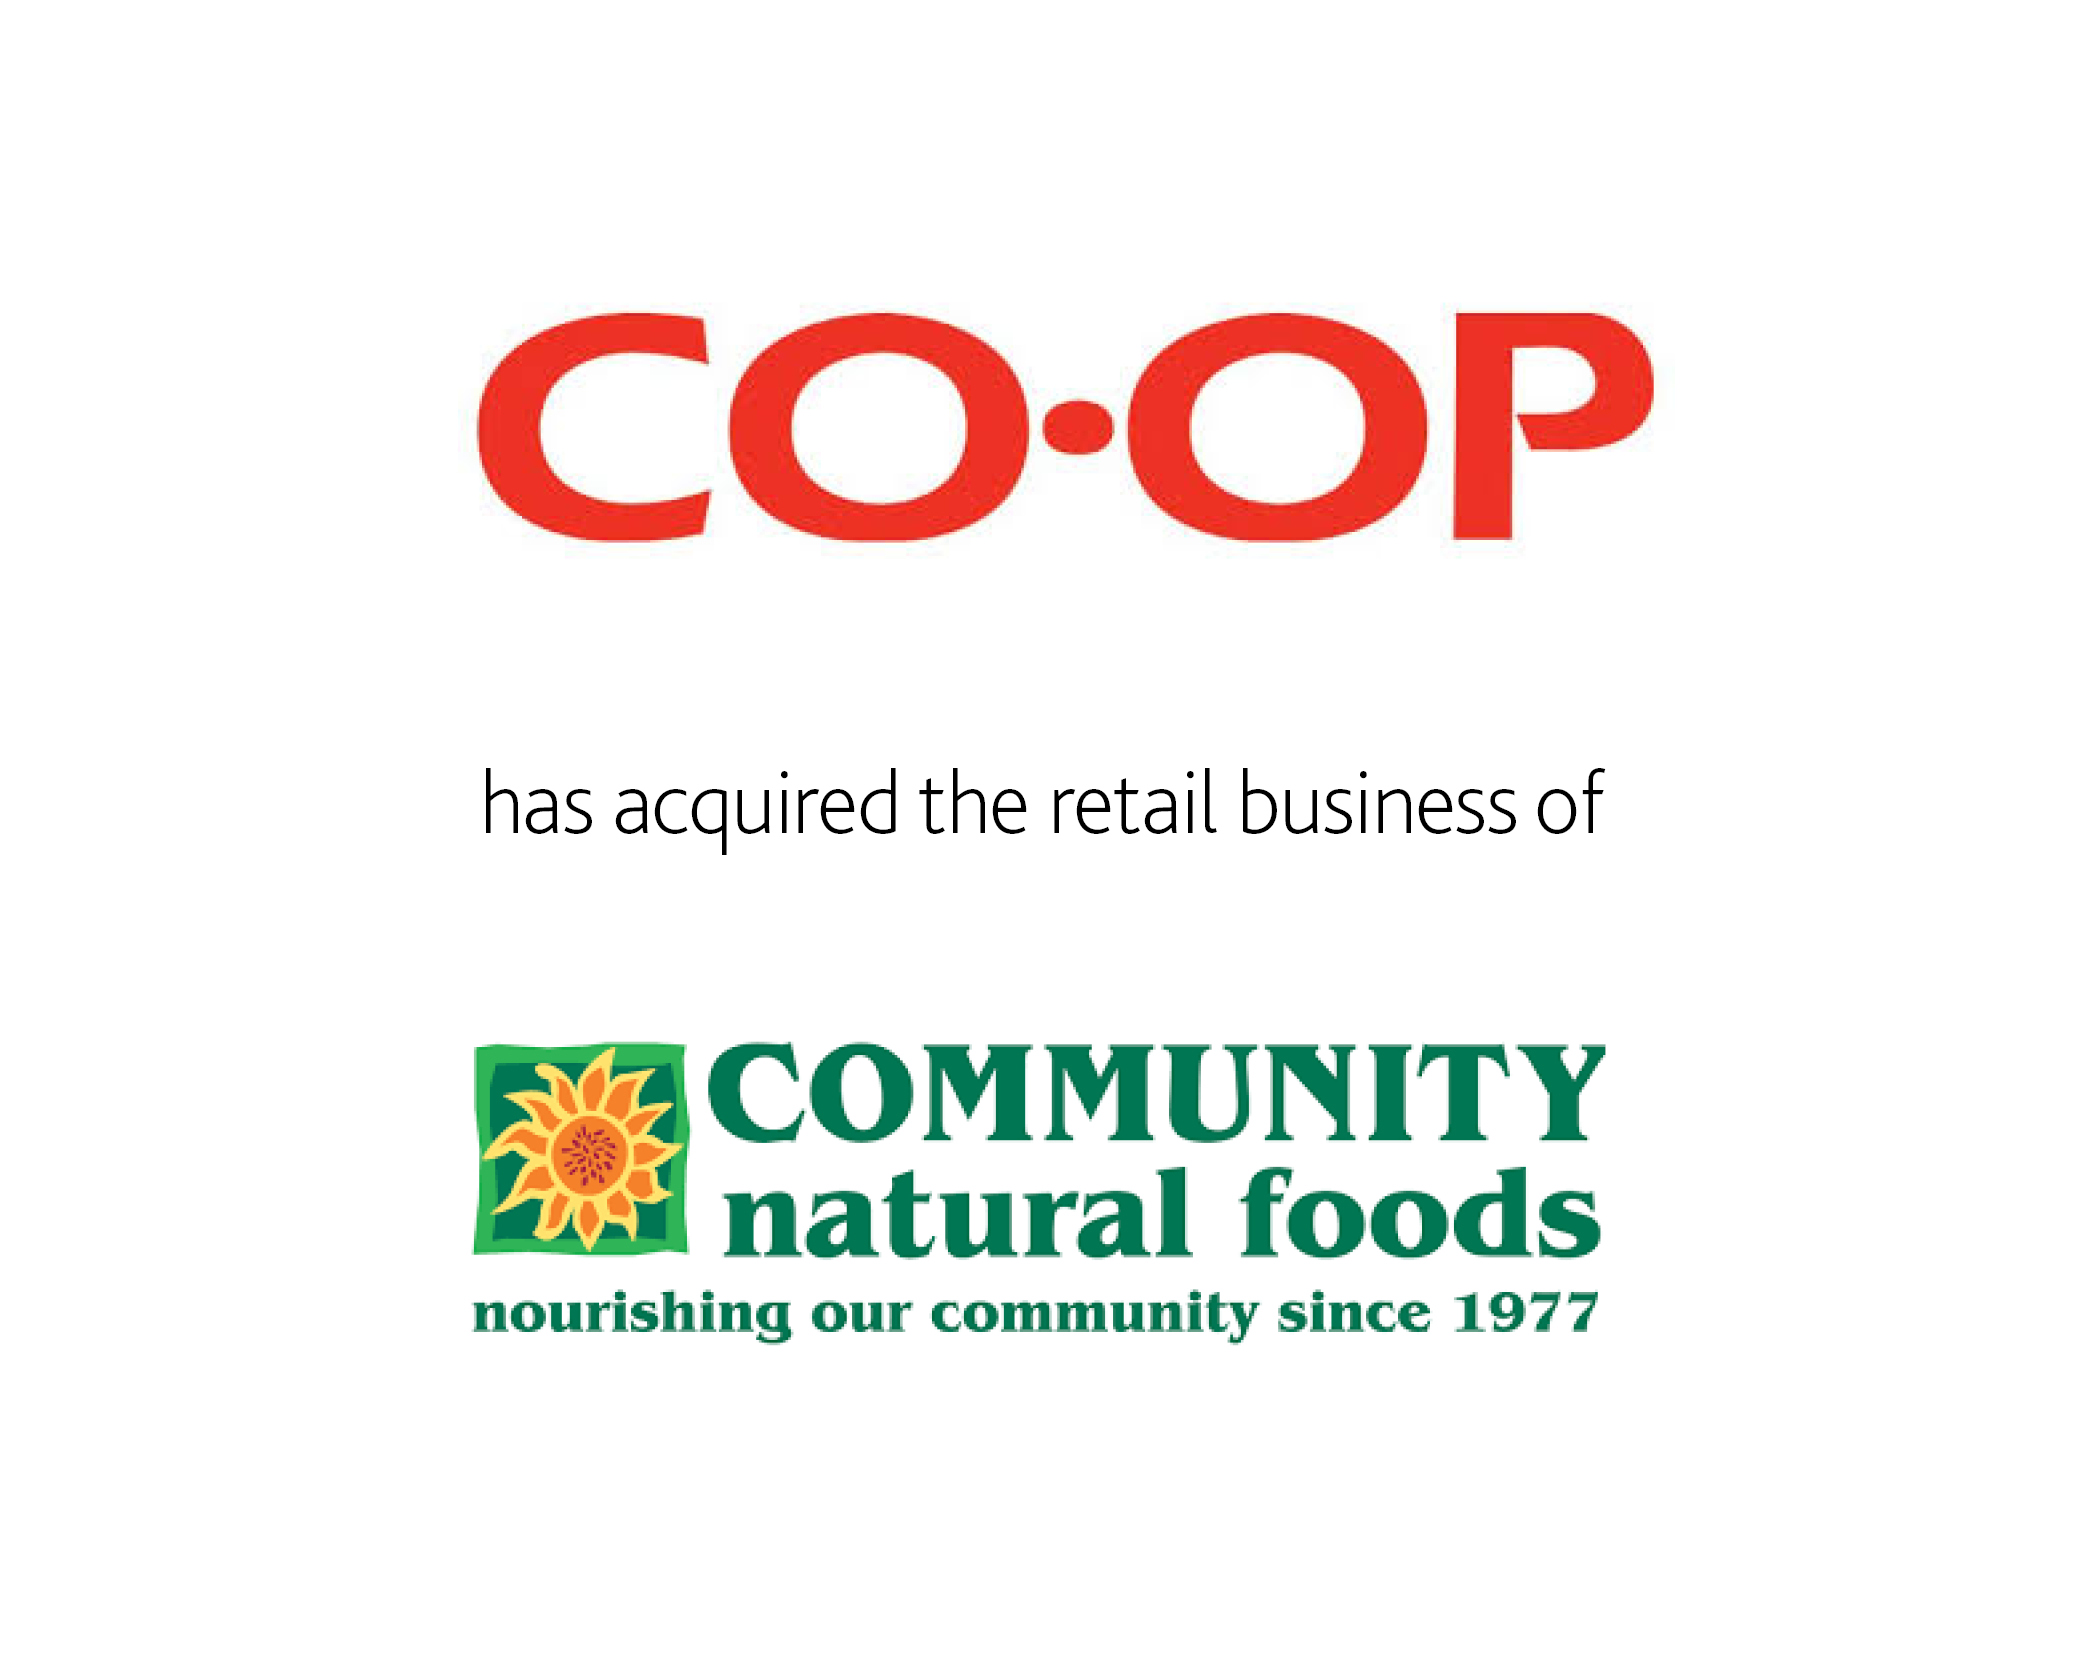 Co-op has acquired the retail business of Community Natural Foods 